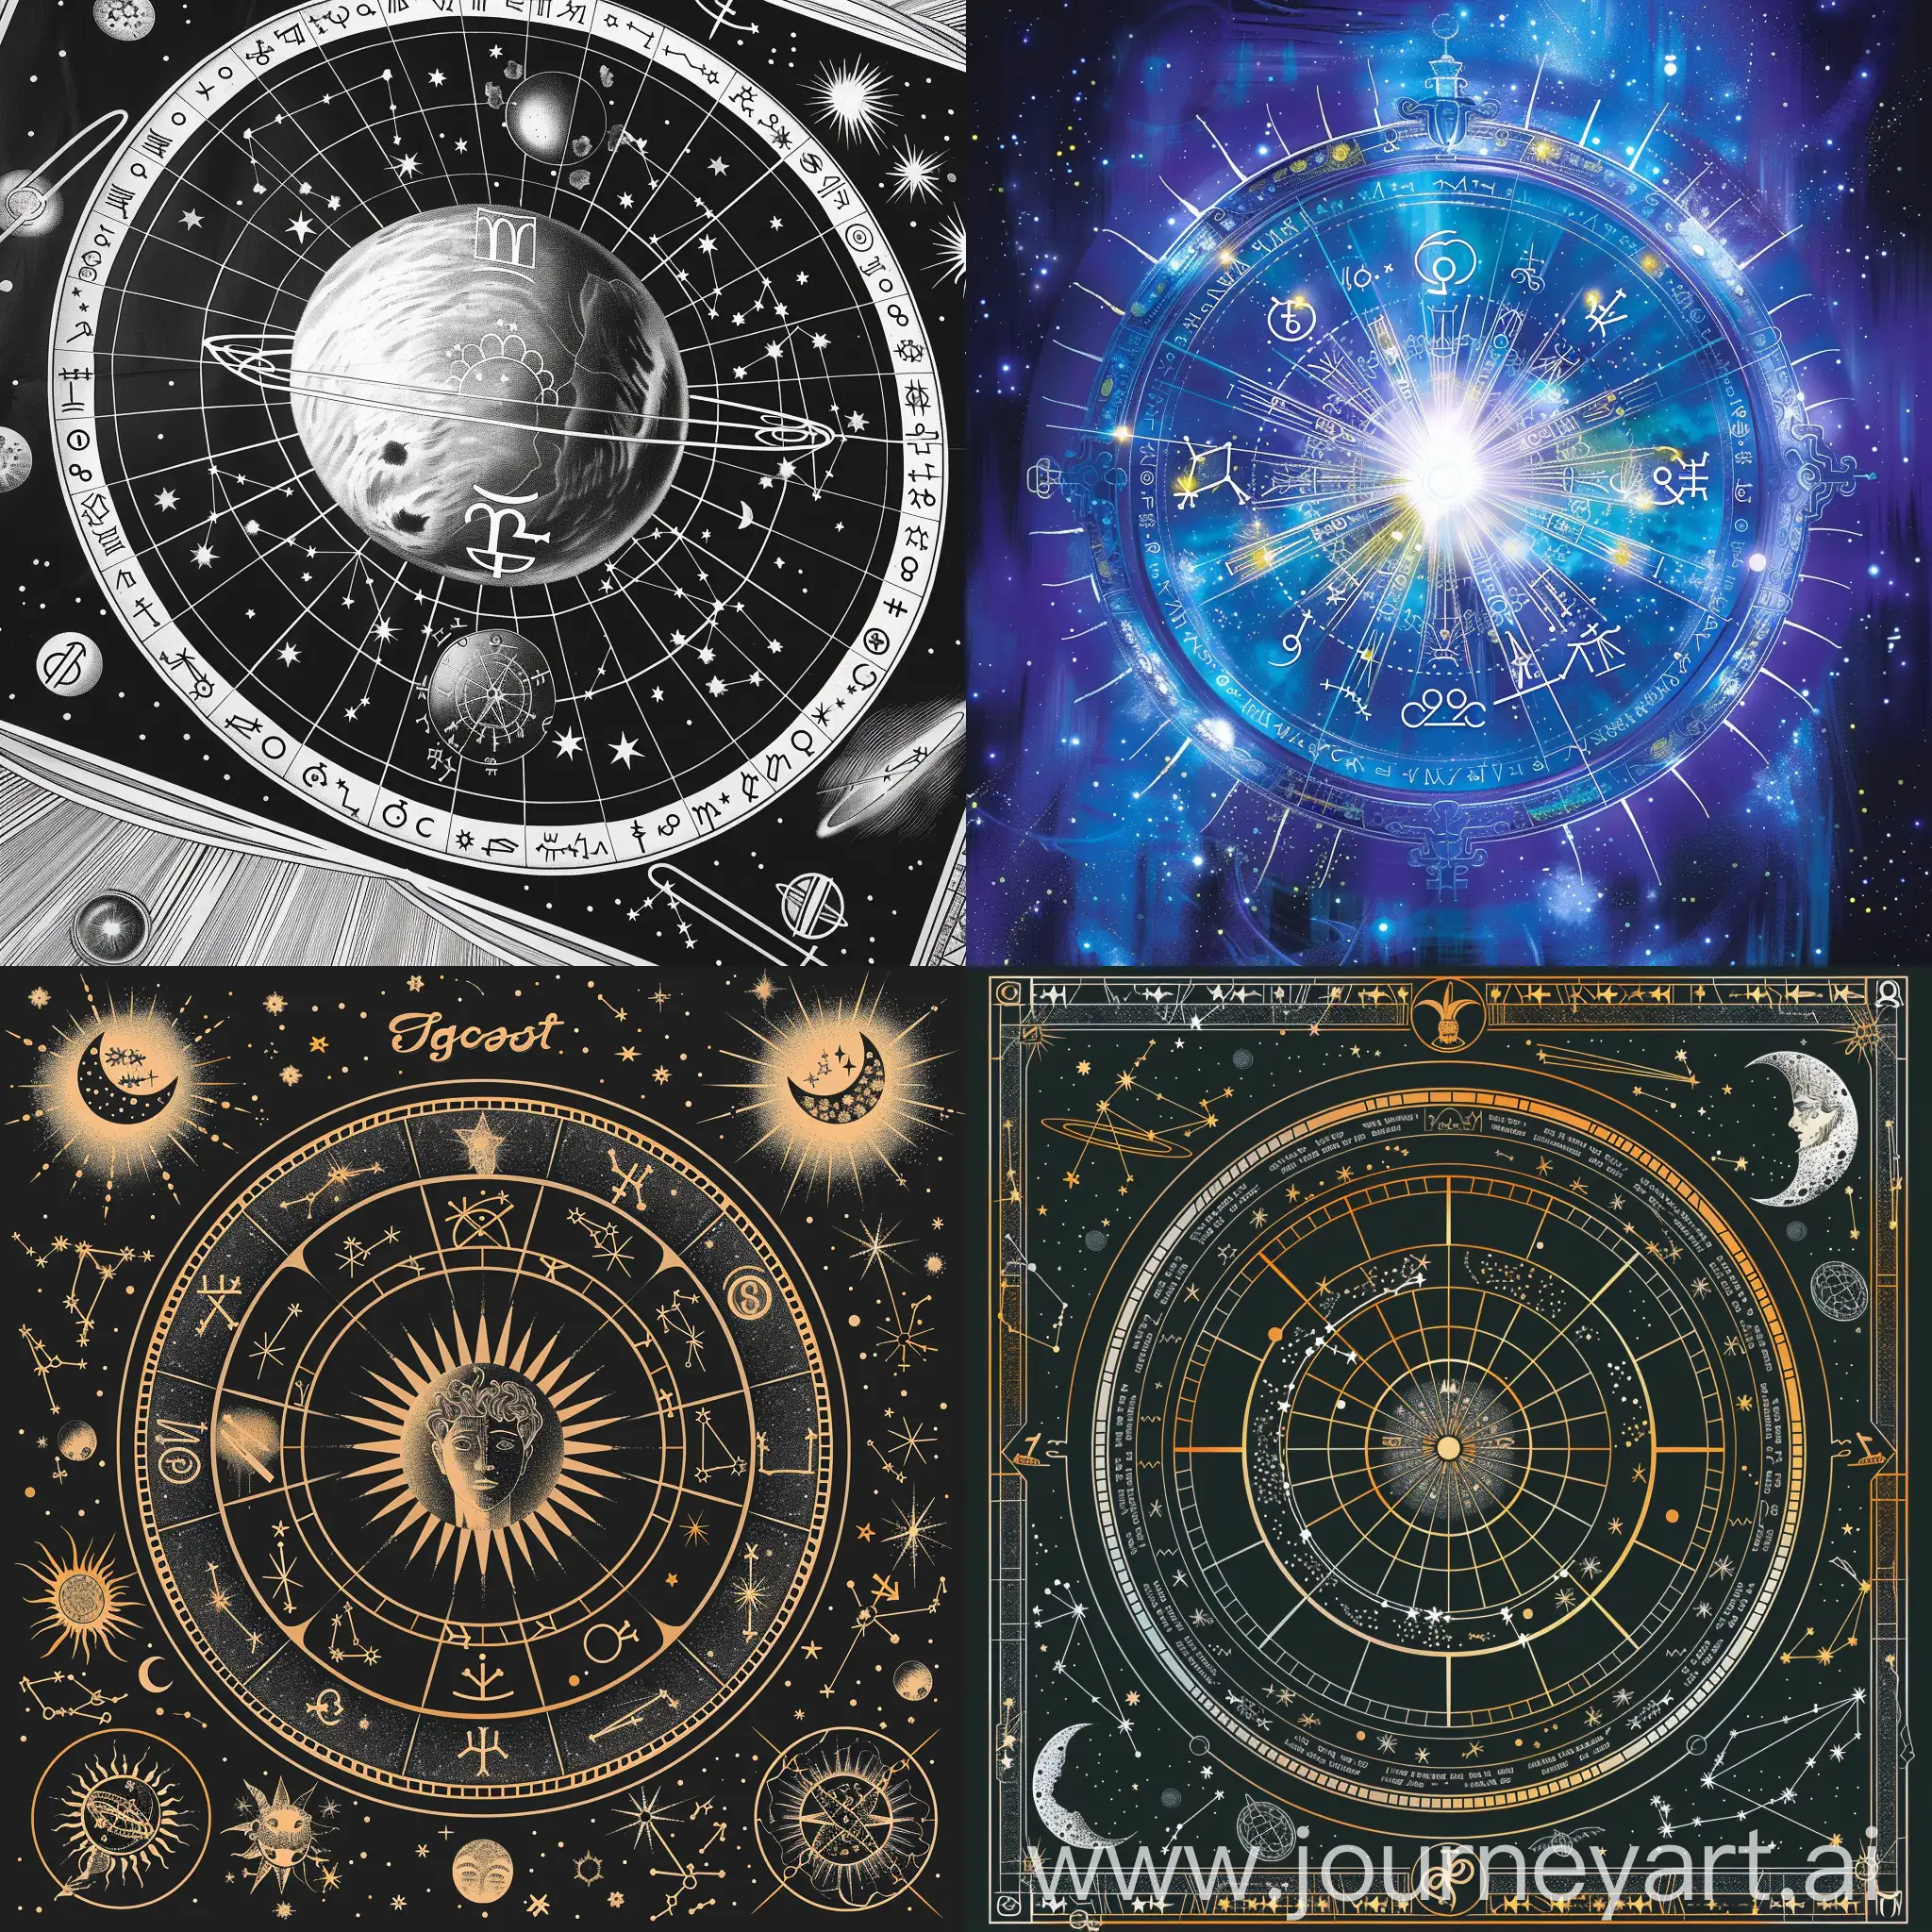 Astrology-Predictions-Concept-with-Zodiac-Signs-and-Mystic-Symbols